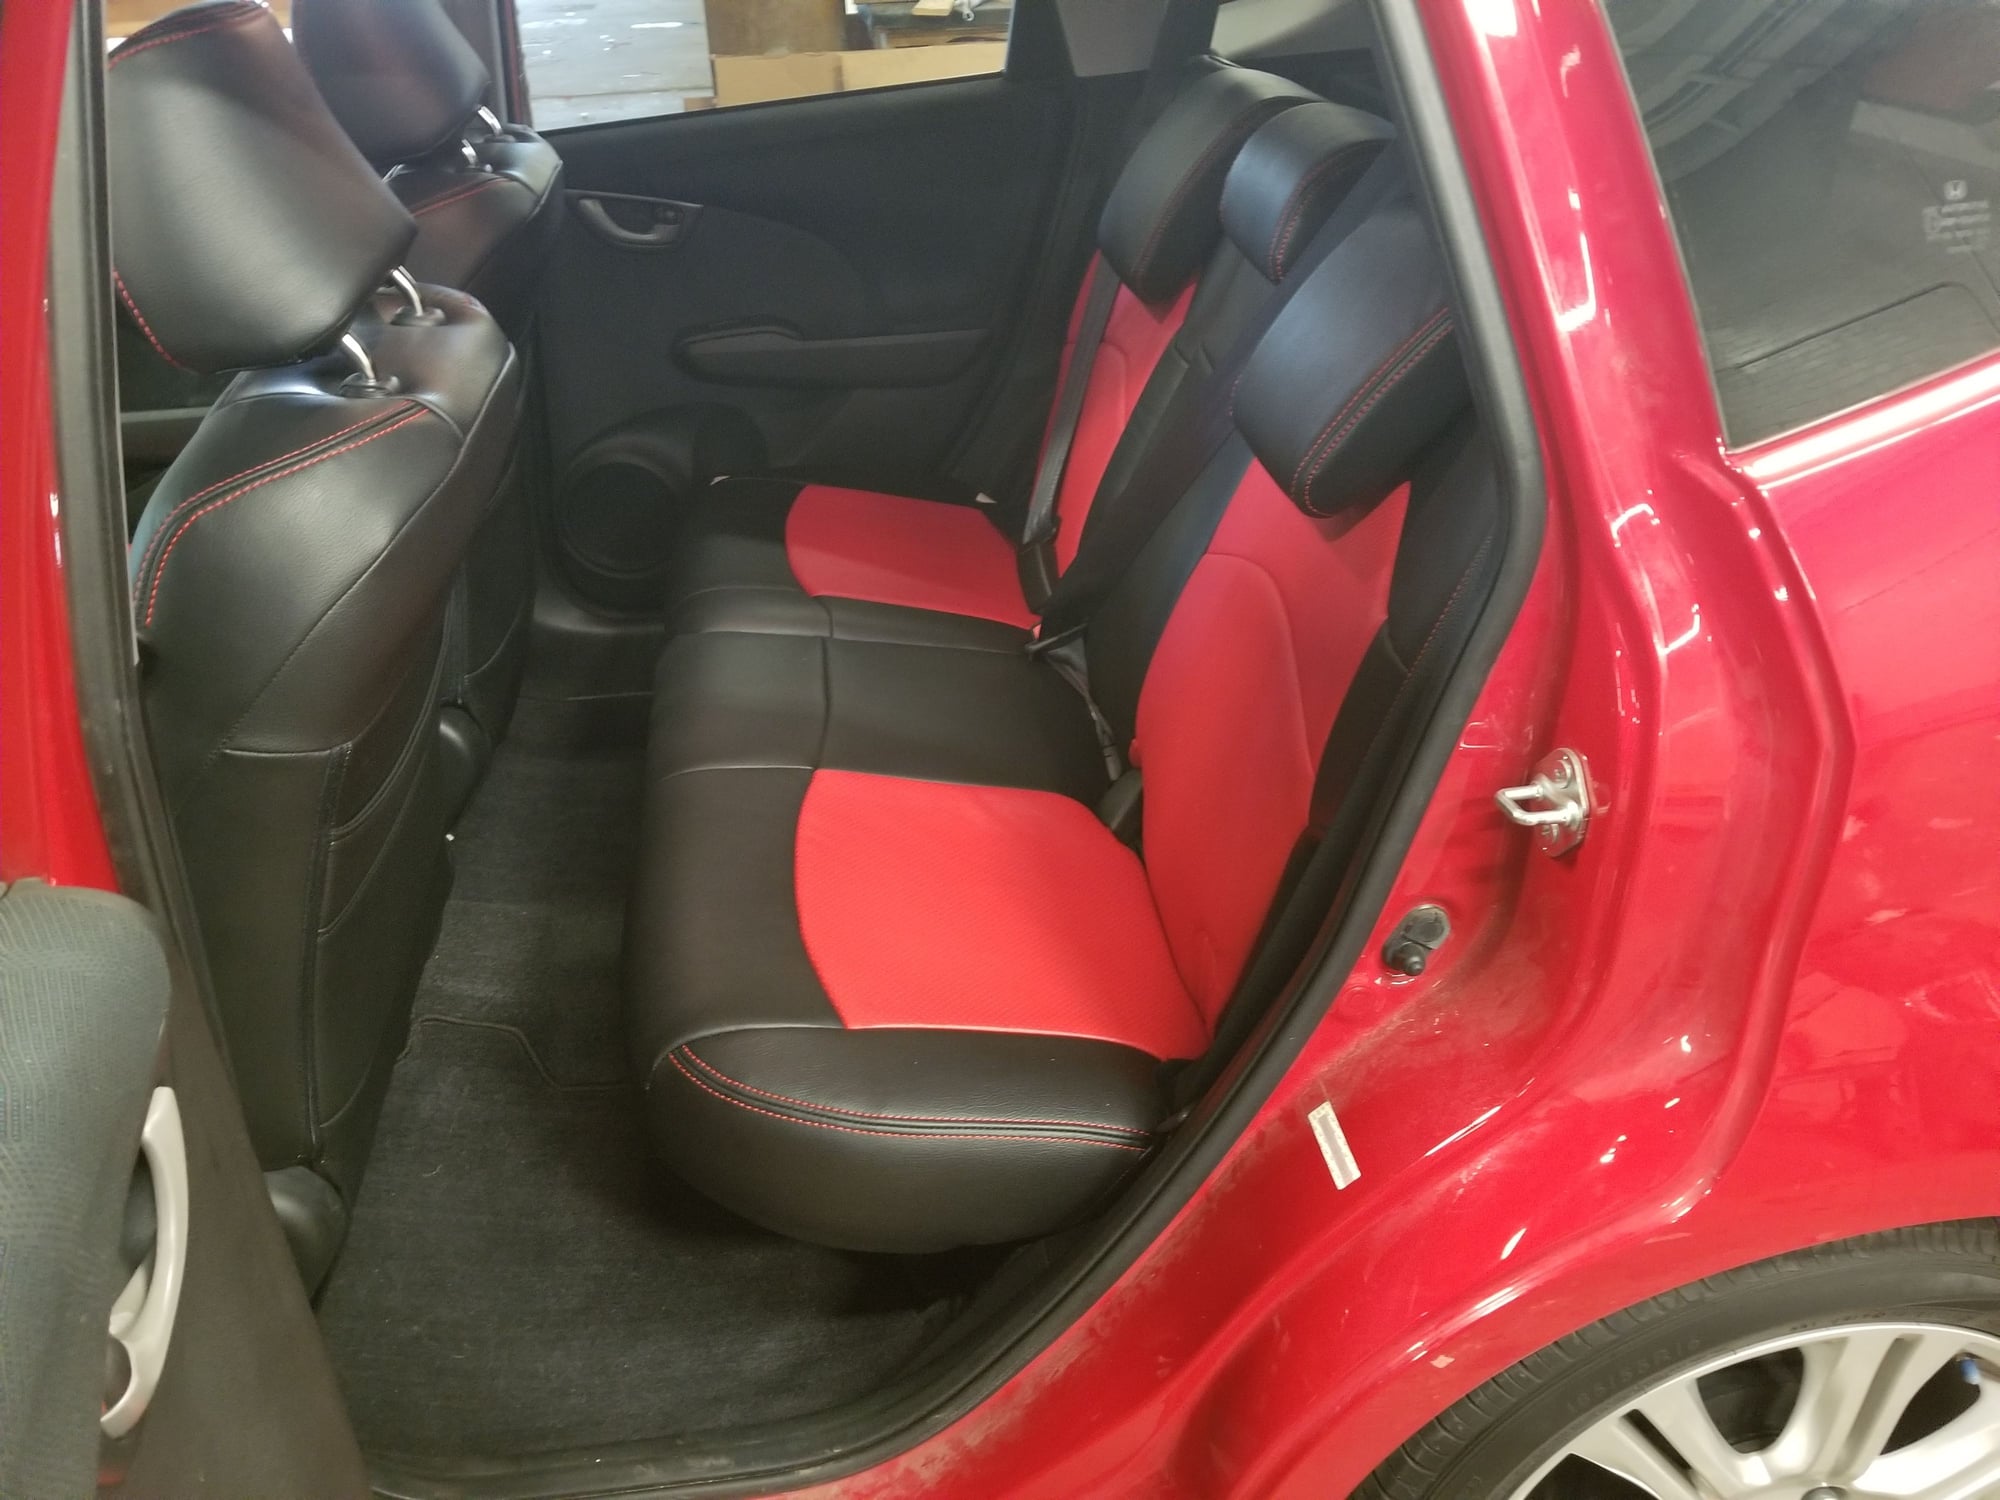 CR-Z seats in a Fit? - Unofficial Honda FIT Forums